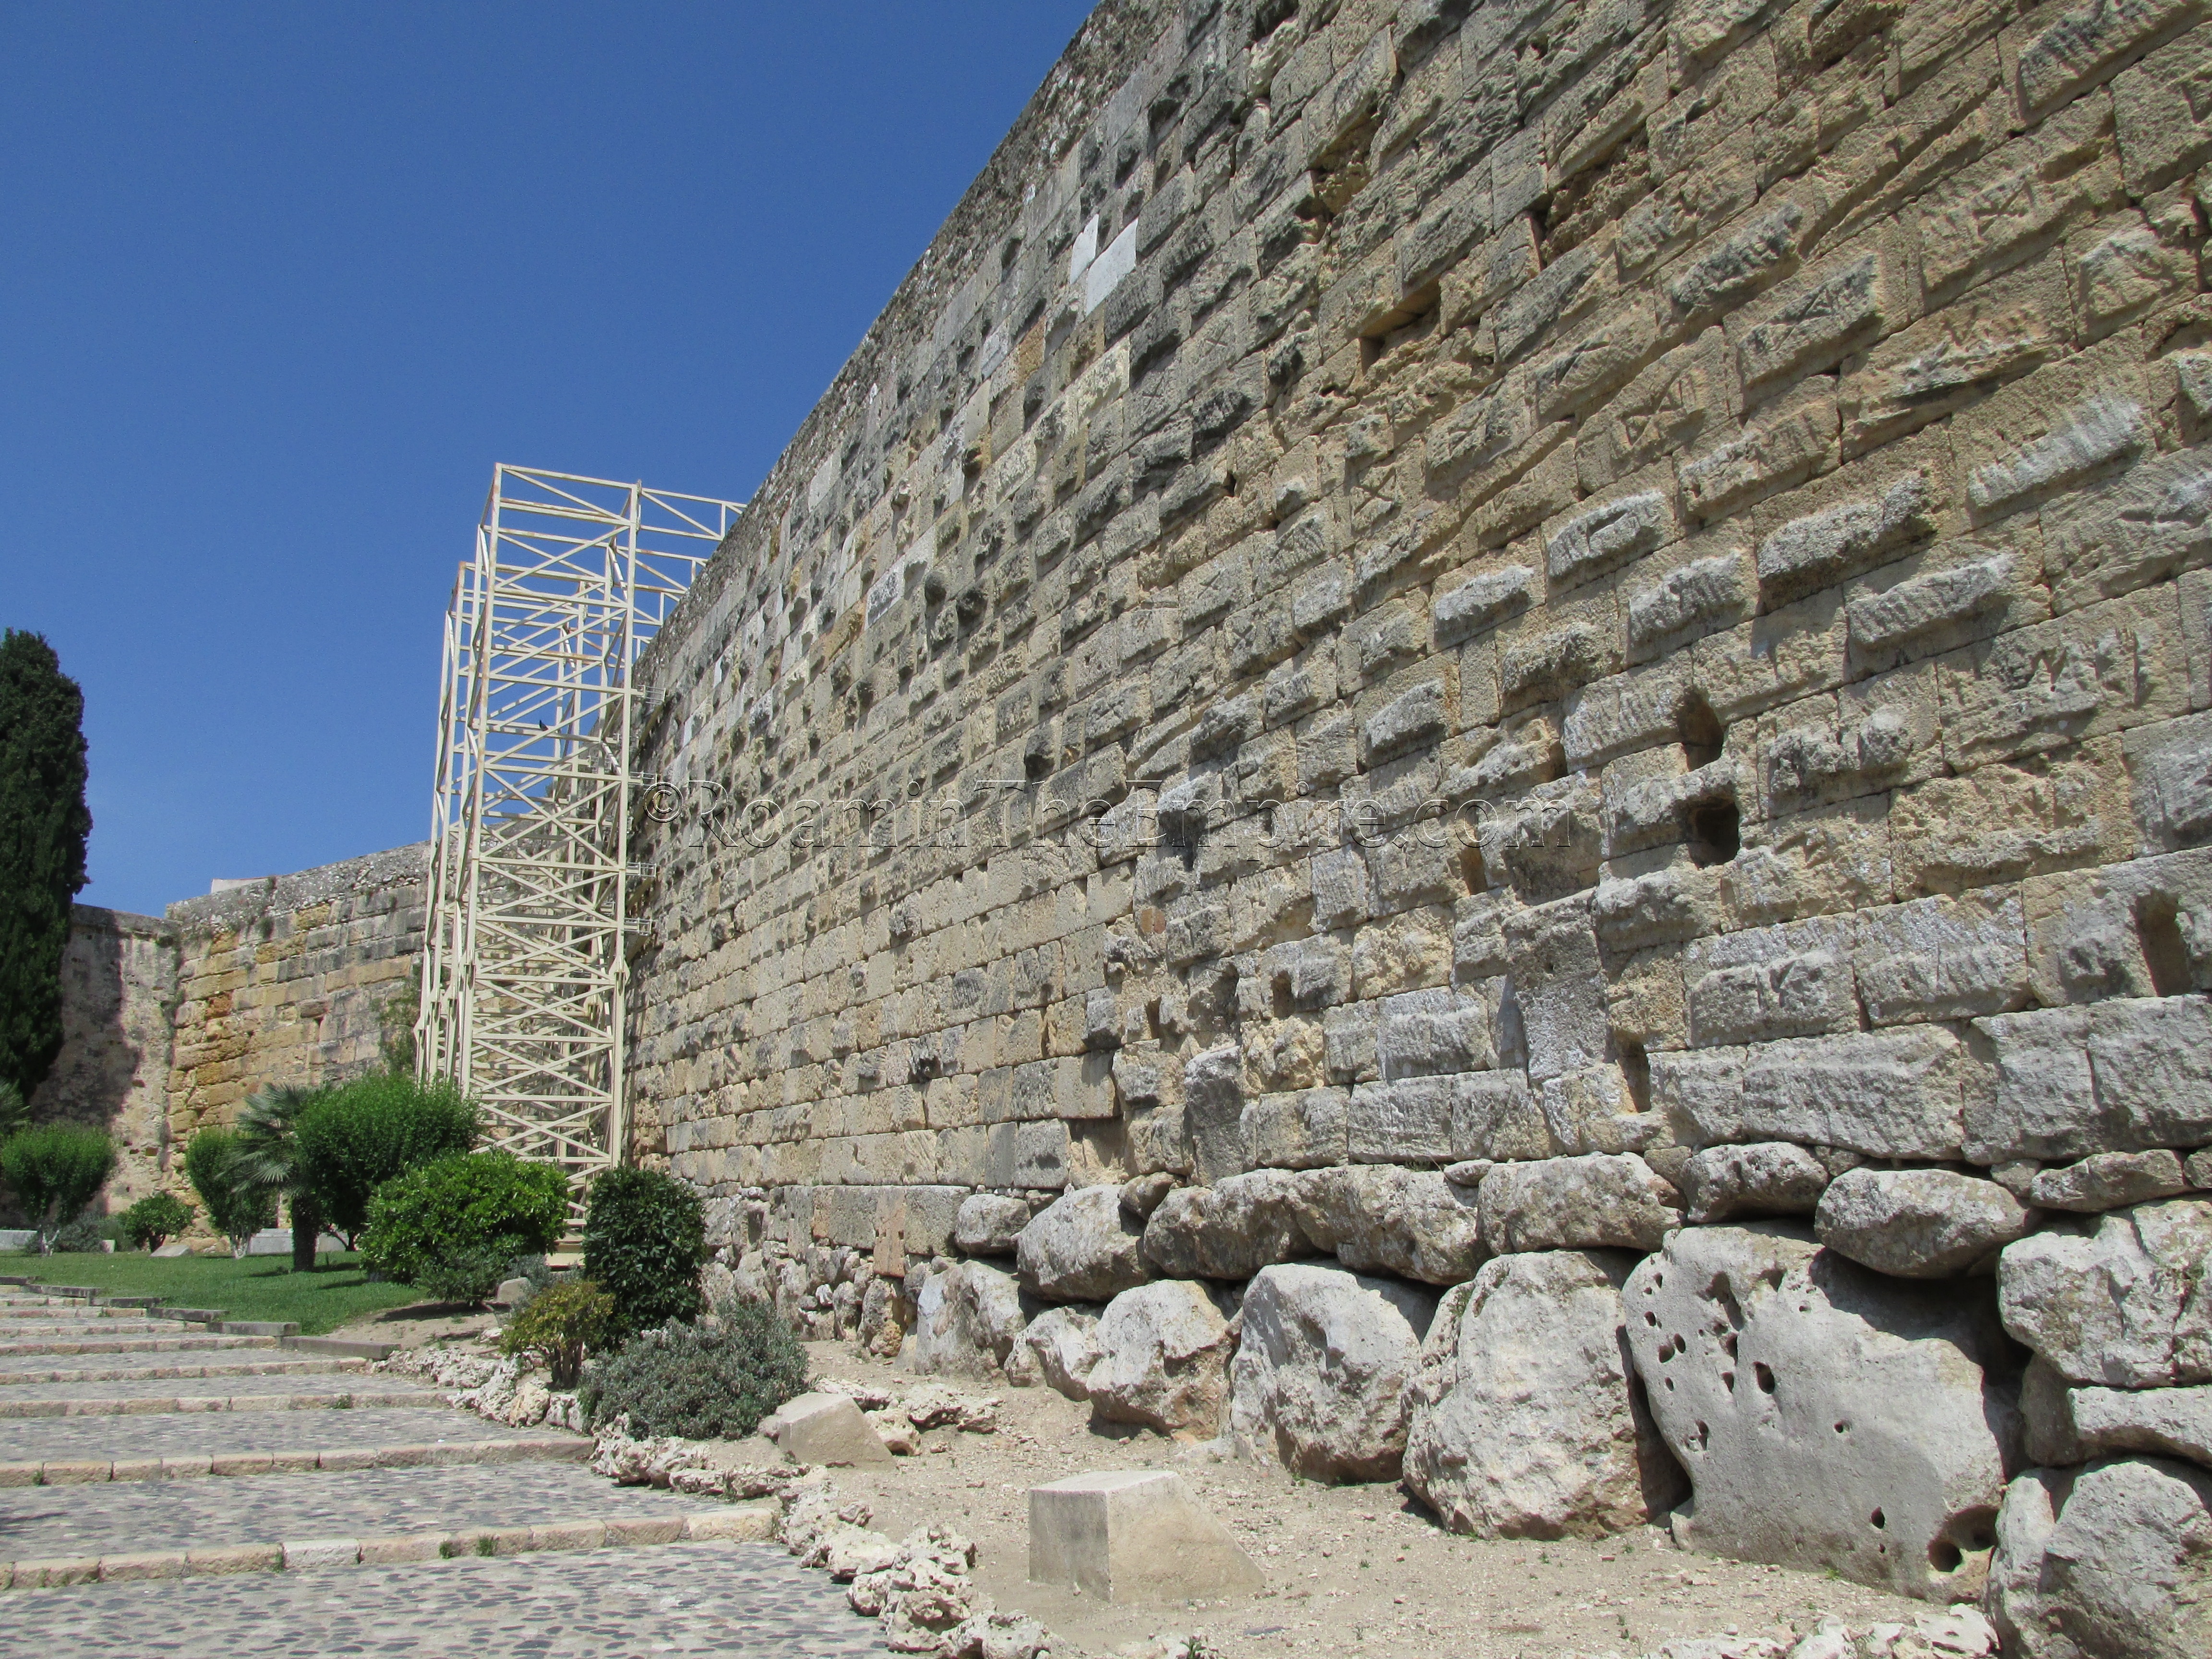 Western wall of Tarraco with foundations dating to the Roman foundation of the city in the late 3rd century BCE.